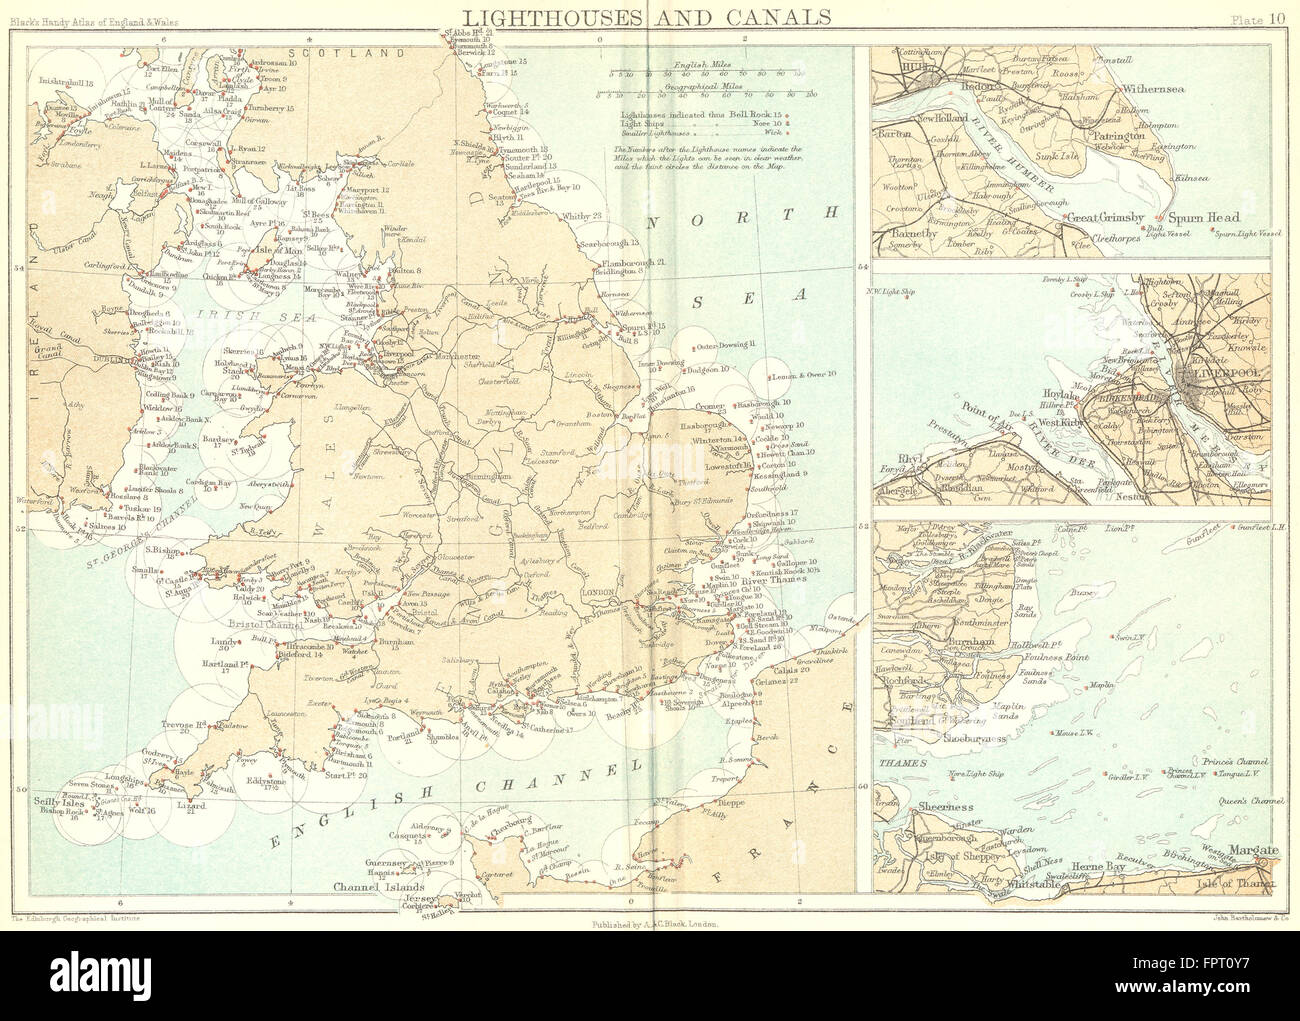 UK: Lighthouses canals: ins Humber Mersey Thames, 1892 antique map Stock Photo